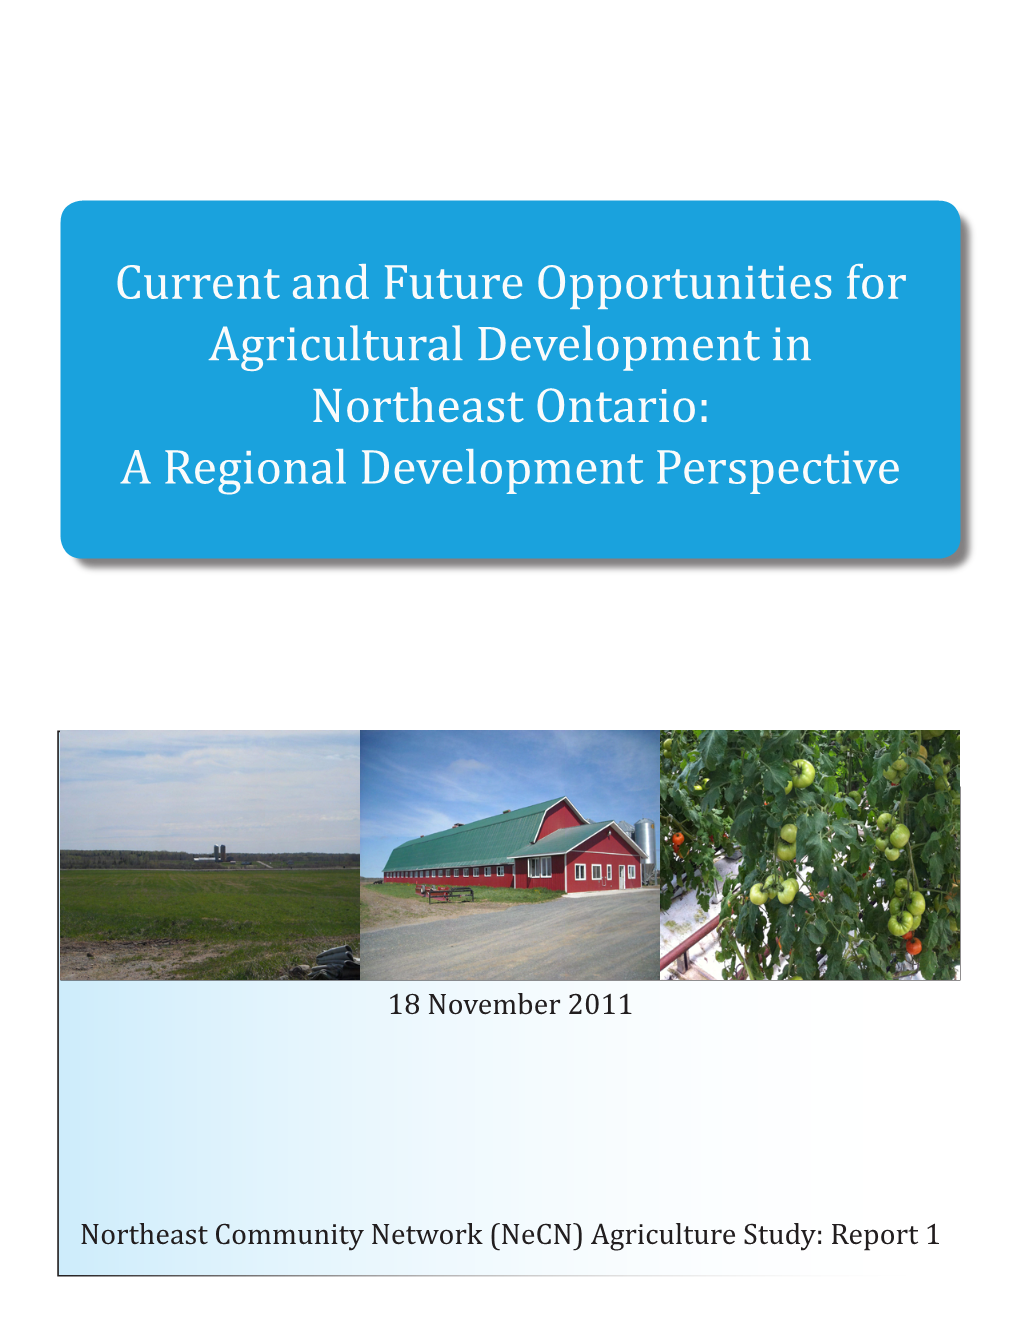 Current and Future Opportunities for Agricultural Development in Northeast Ontario: a Regional Development Perspective